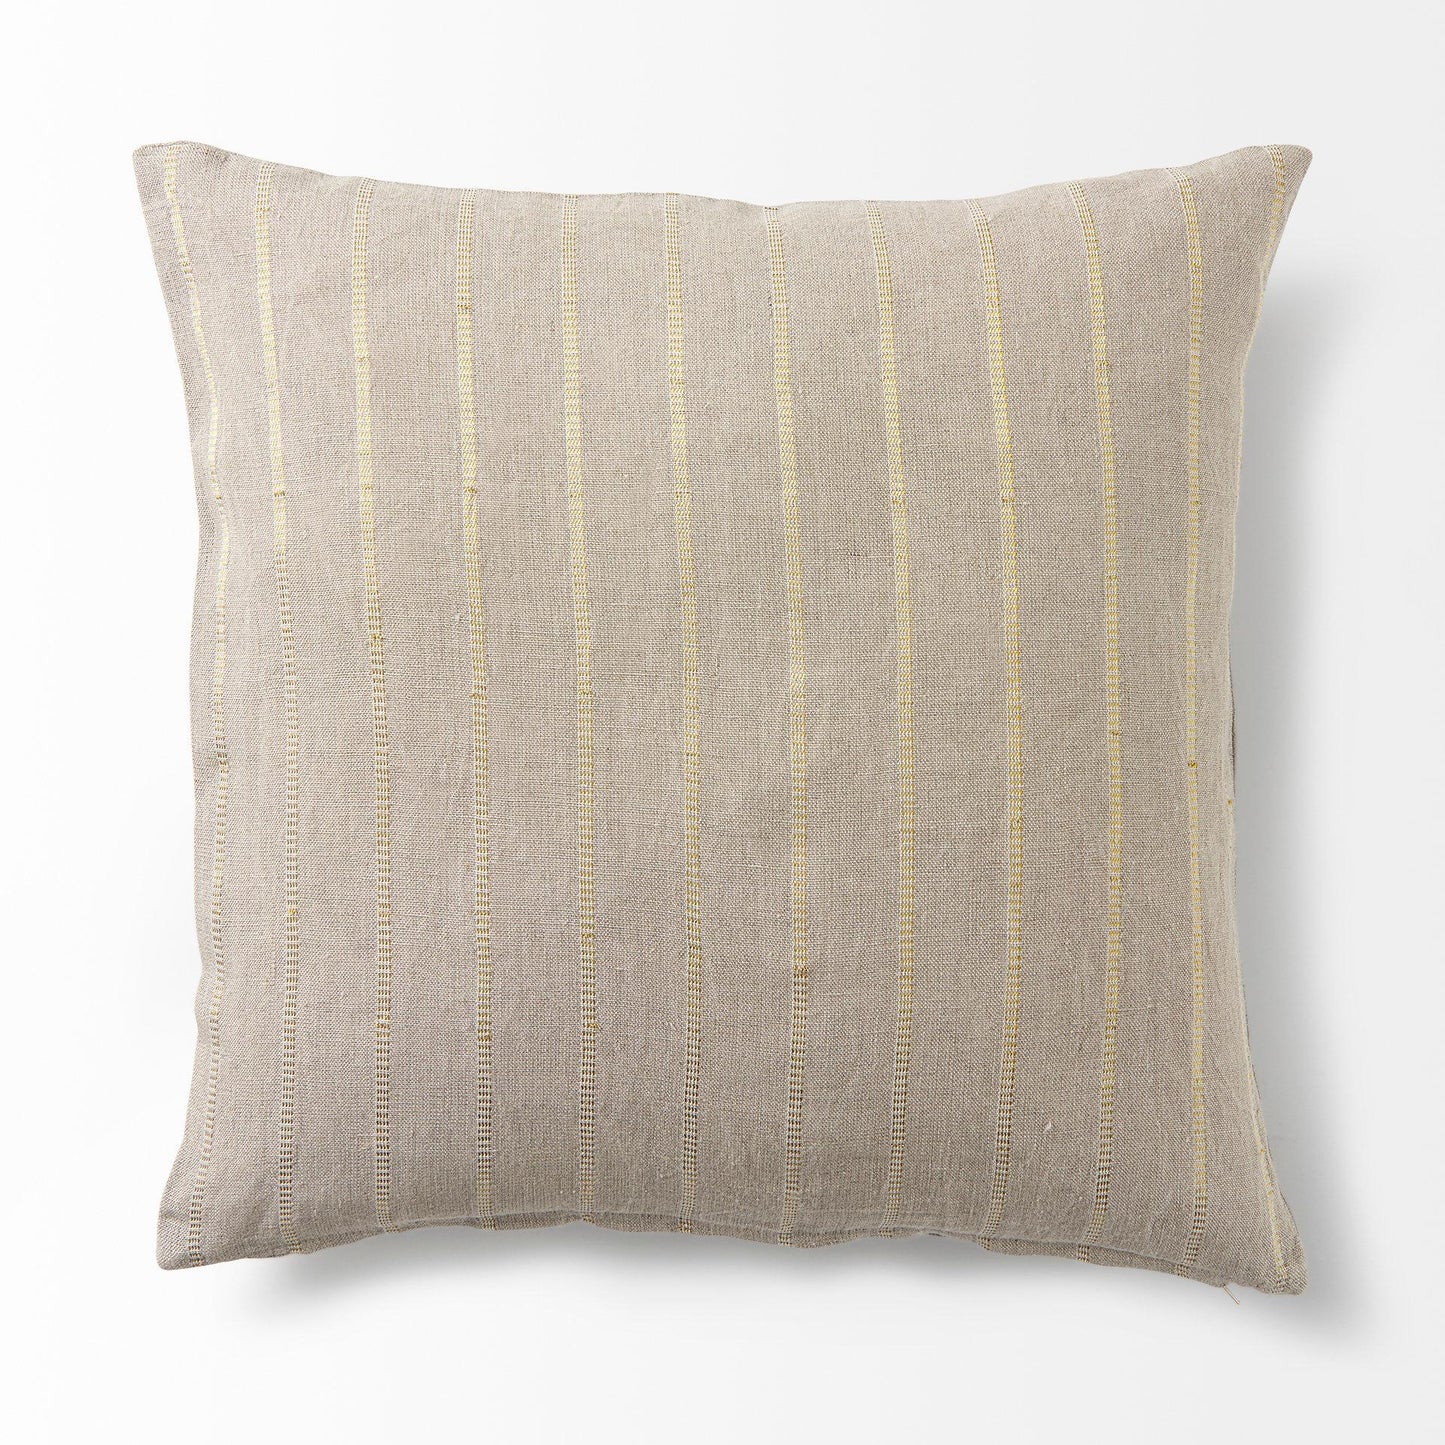 Danika 18 x 18 Beige and Gold Fabric Decorative Pillow Cover